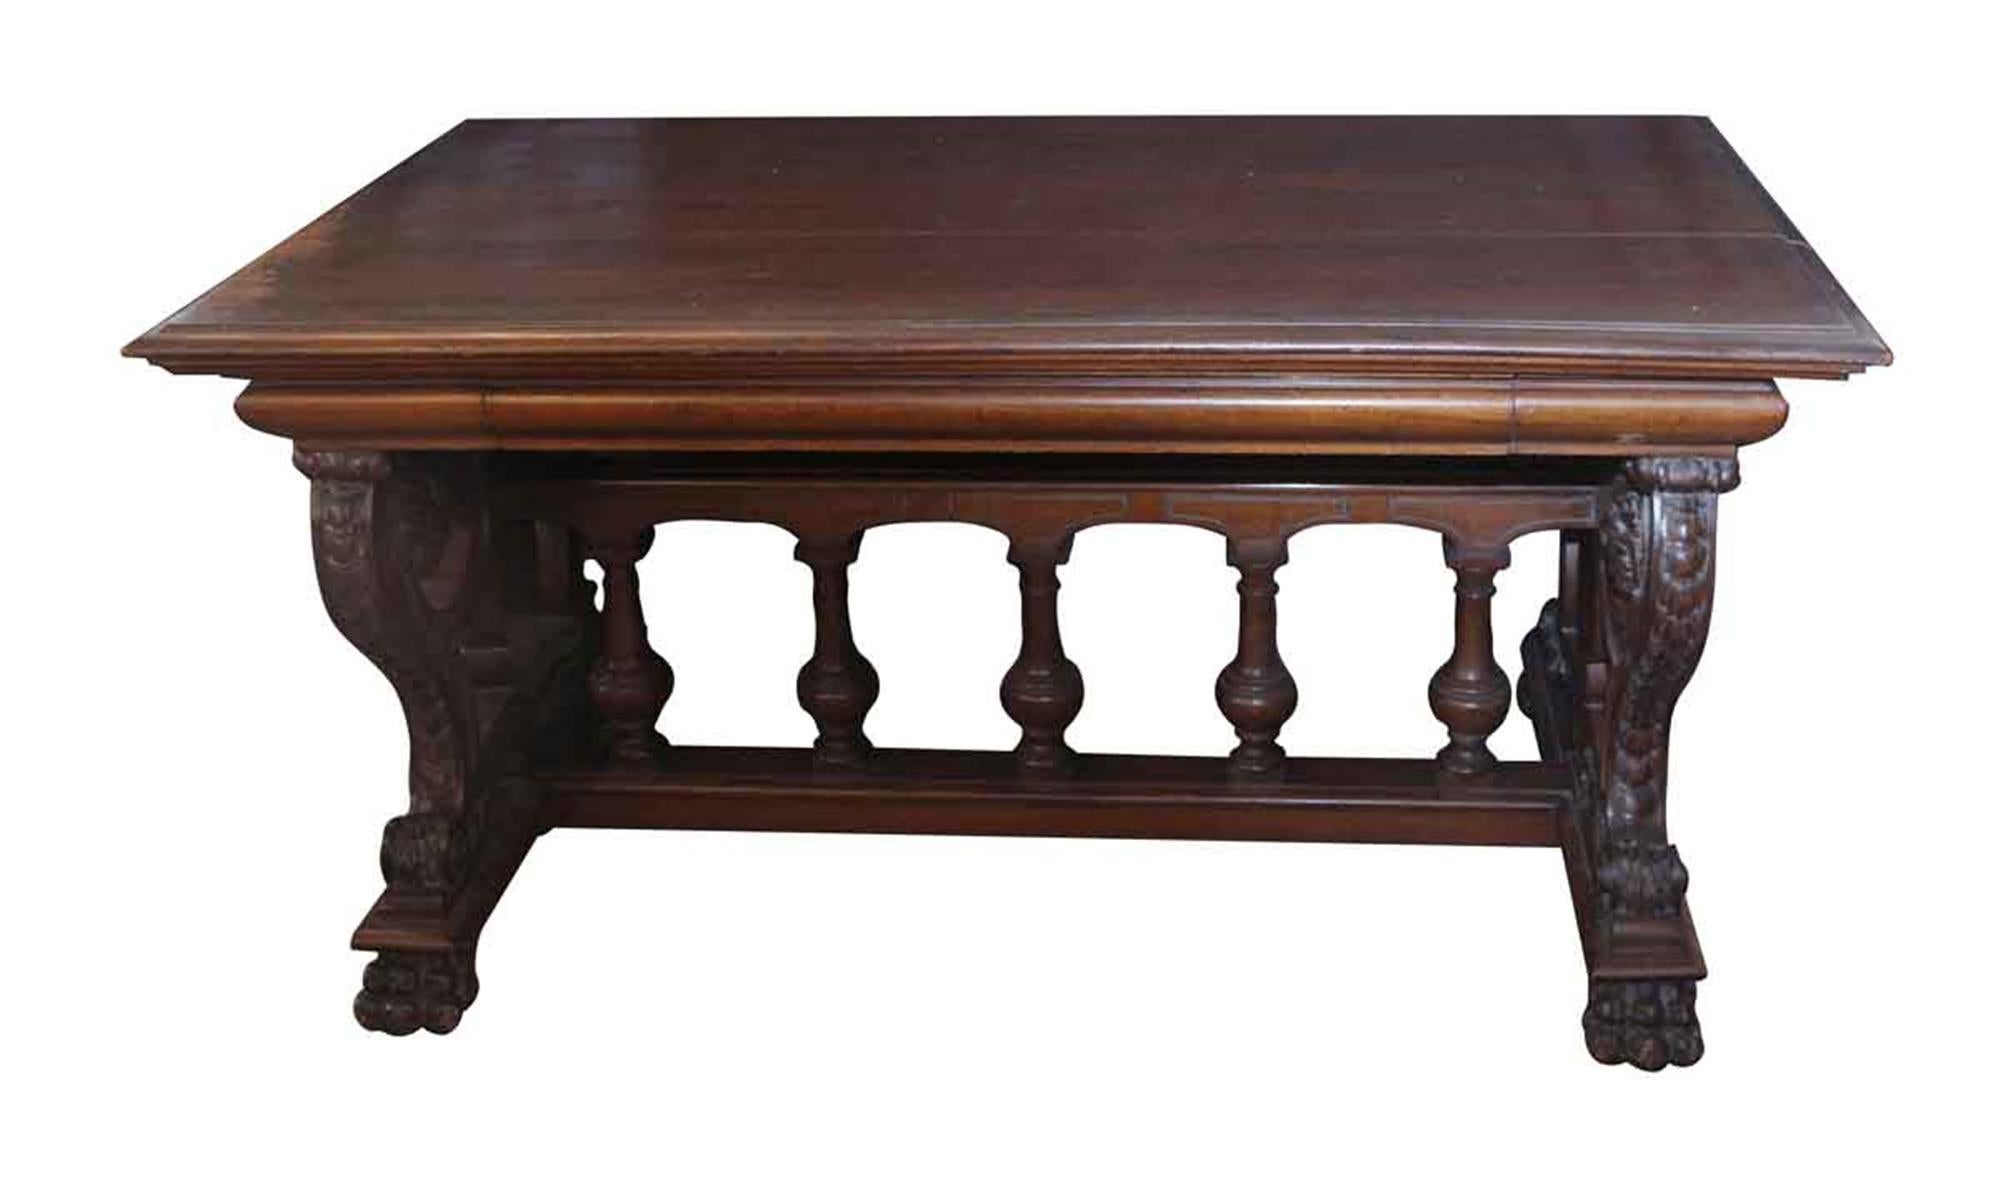 Dark wood tone RJ Horner claw foot library table with ornate carvings throughout the legs and base from the 1880s. The top has a crack in the center and there is some minor wear from age and use. This can be seen at our 2420 Broadway location on the